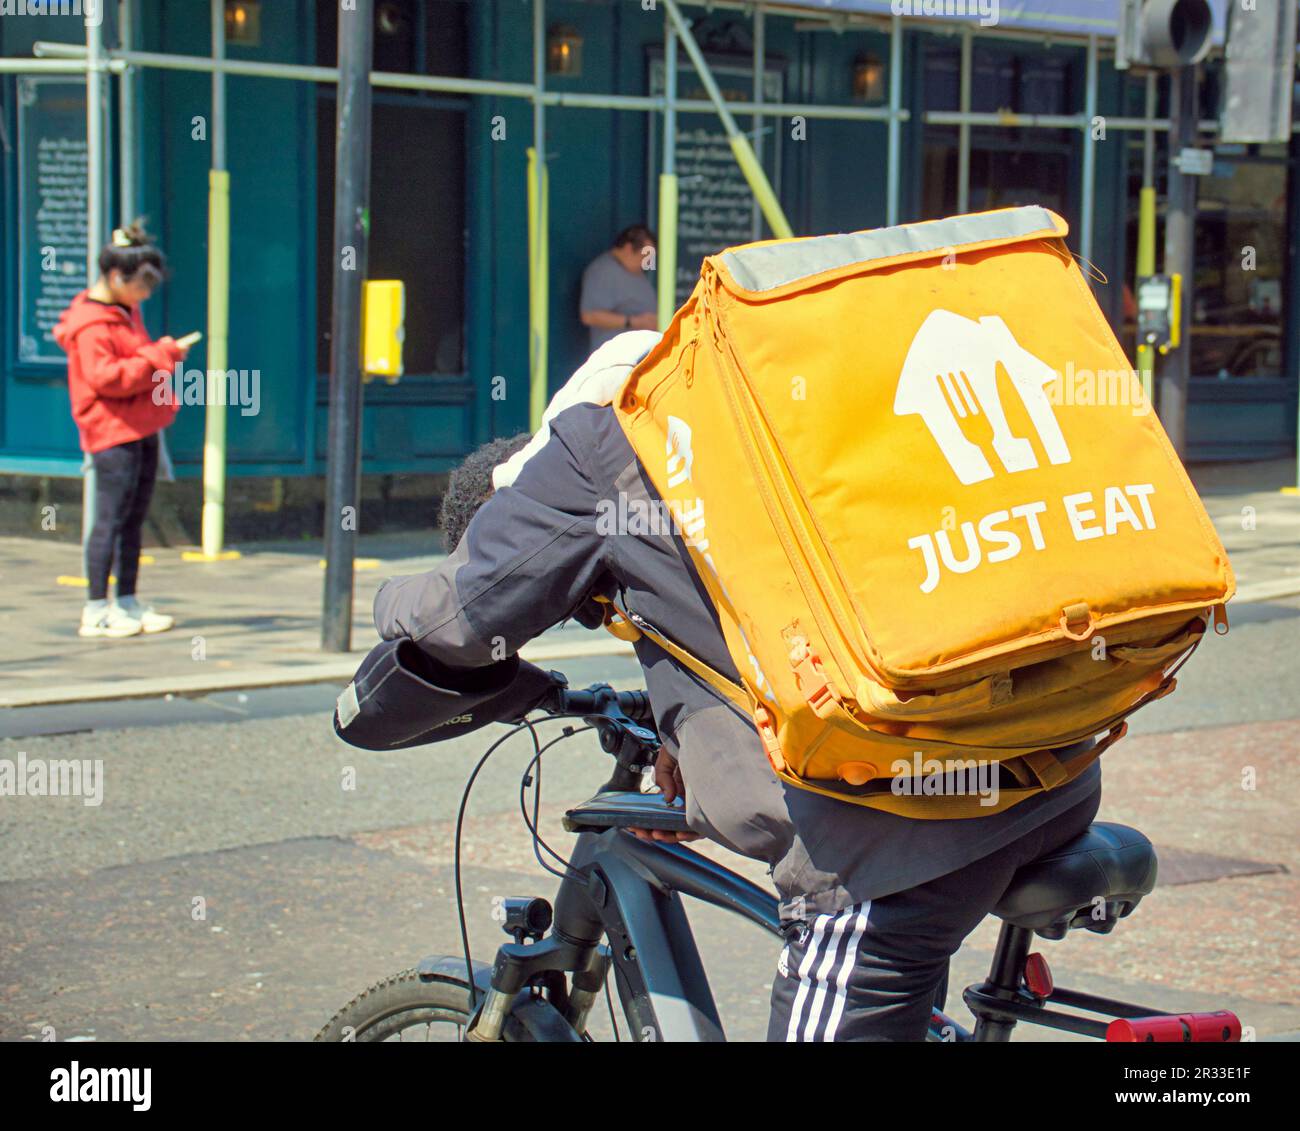 just eat delivery cyclist on the street Stock Photo